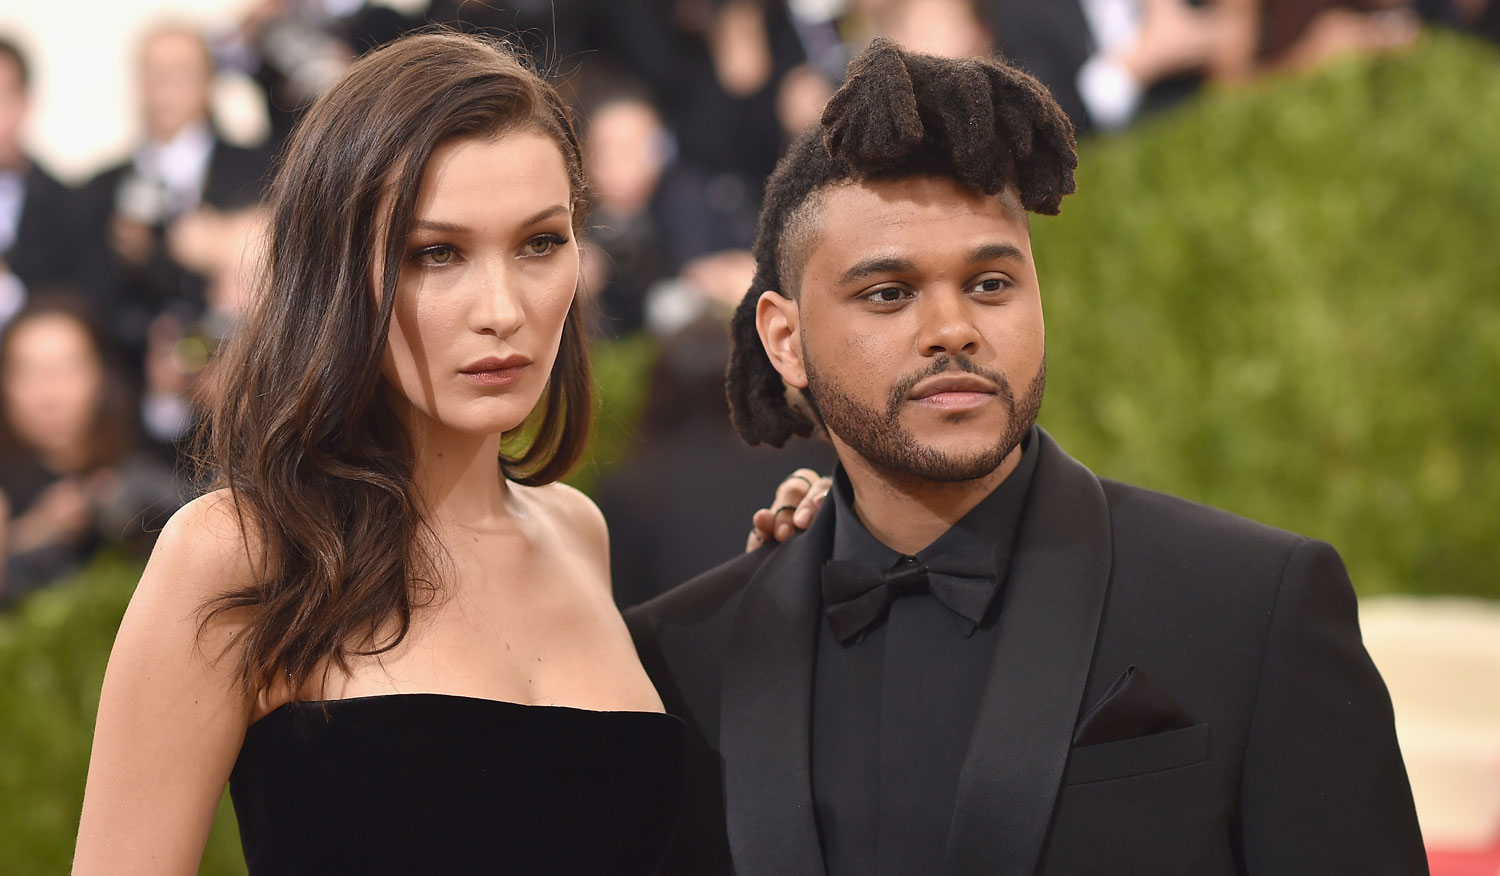 Bella Hadid & The Weeknd Share a Smooch at a Party in Cannes! 2018